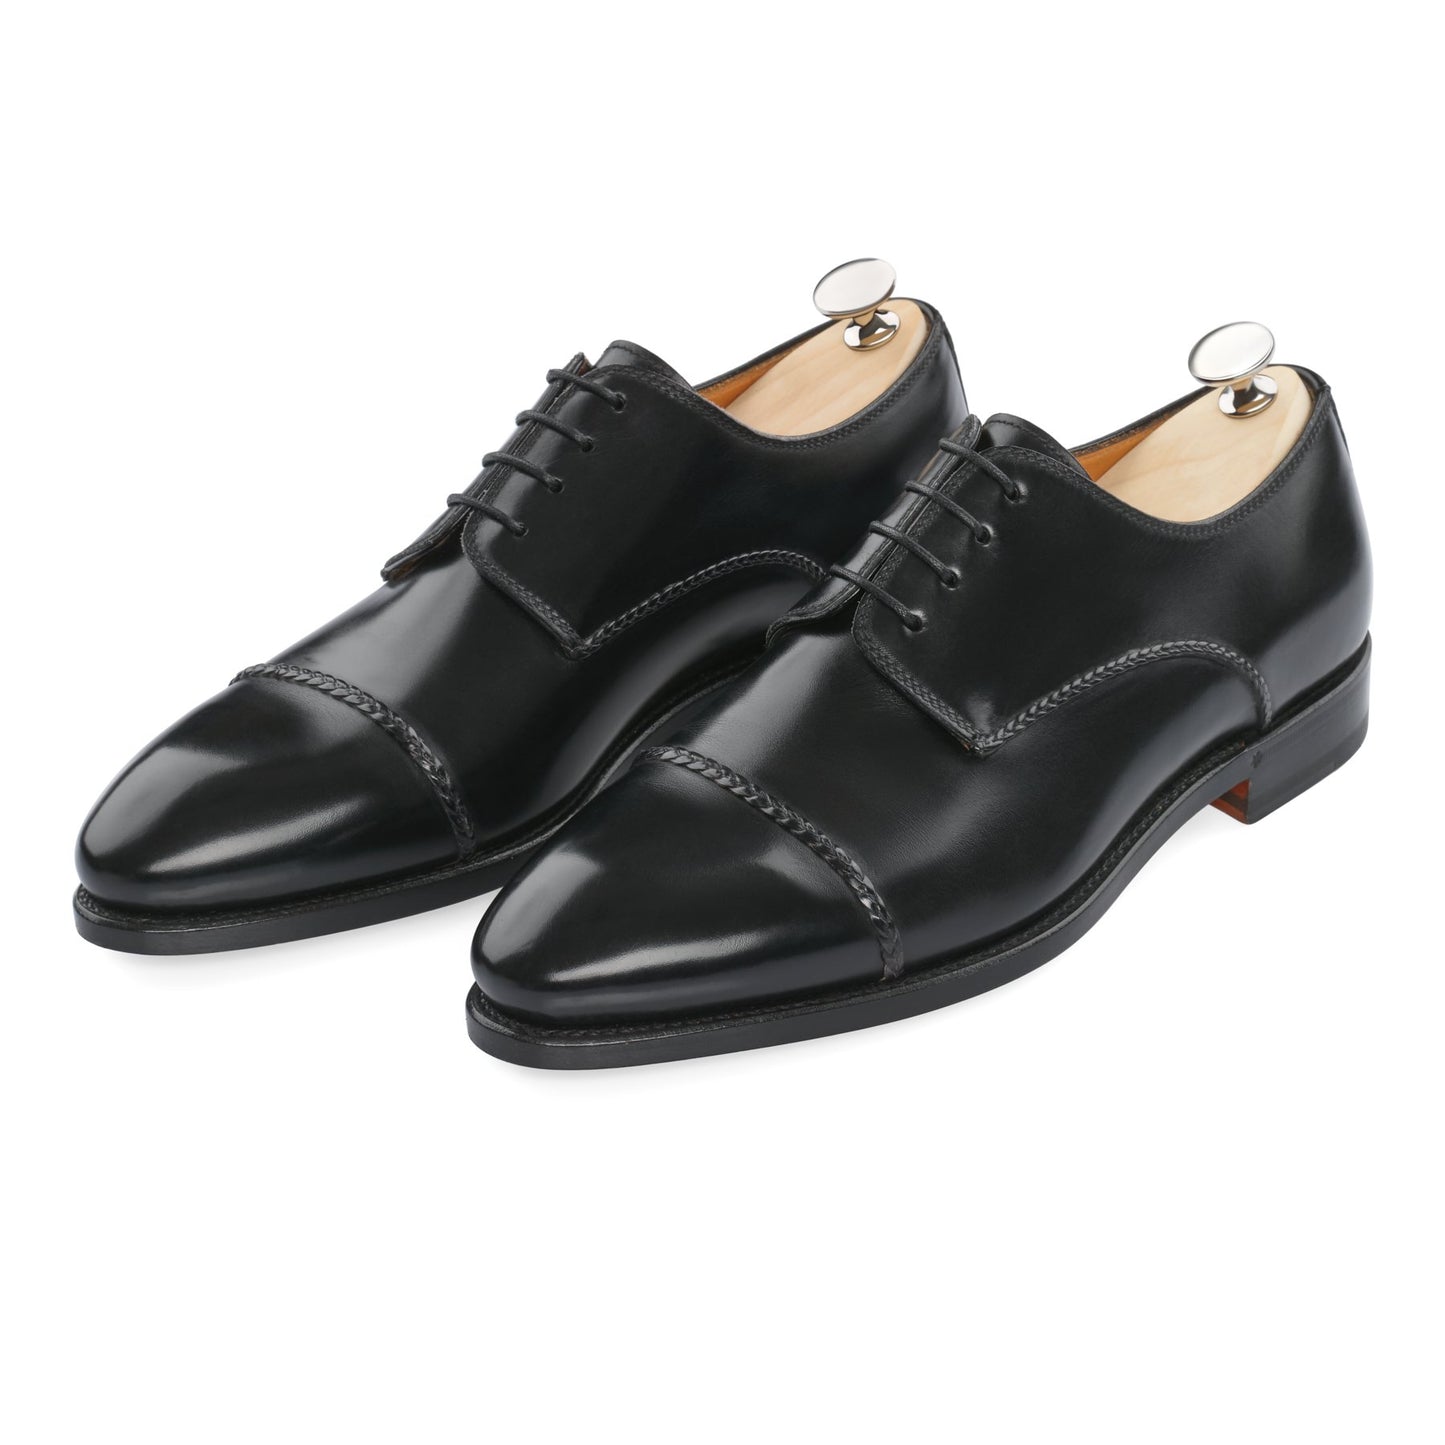 Bontoni "D'Amore" Four-Eyelet Derby with Hand-Stitched Braided Cap Toe Details - SARTALE